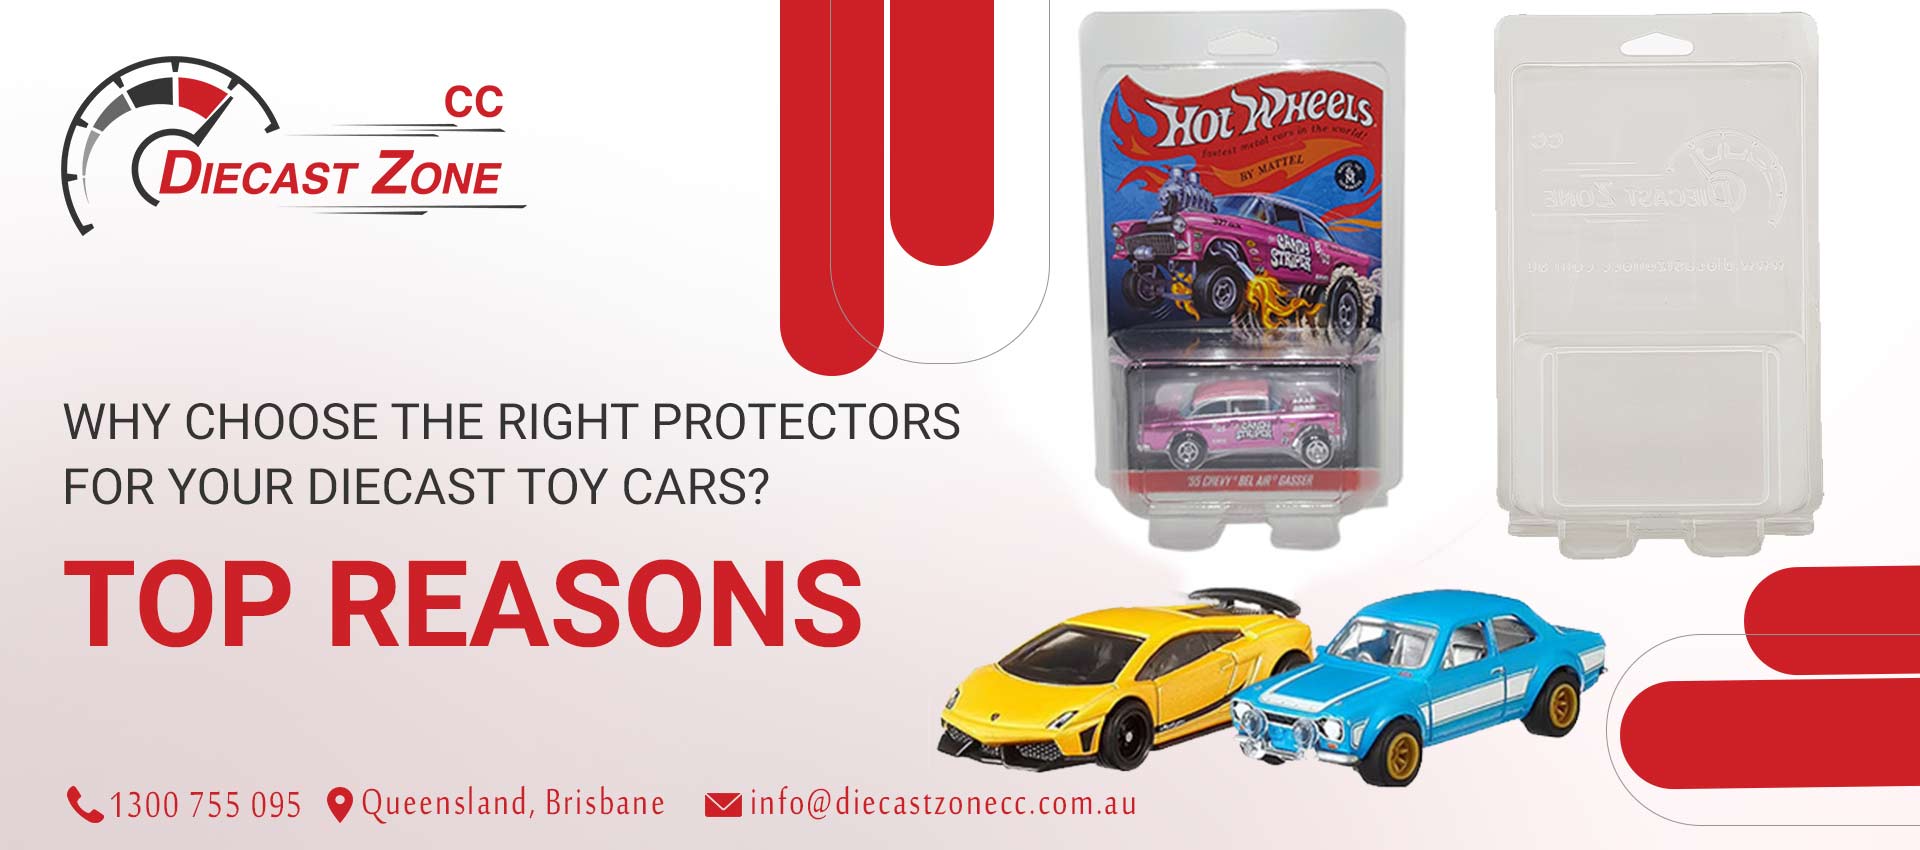 How to find the Best Protectors for Your Diecast Cars